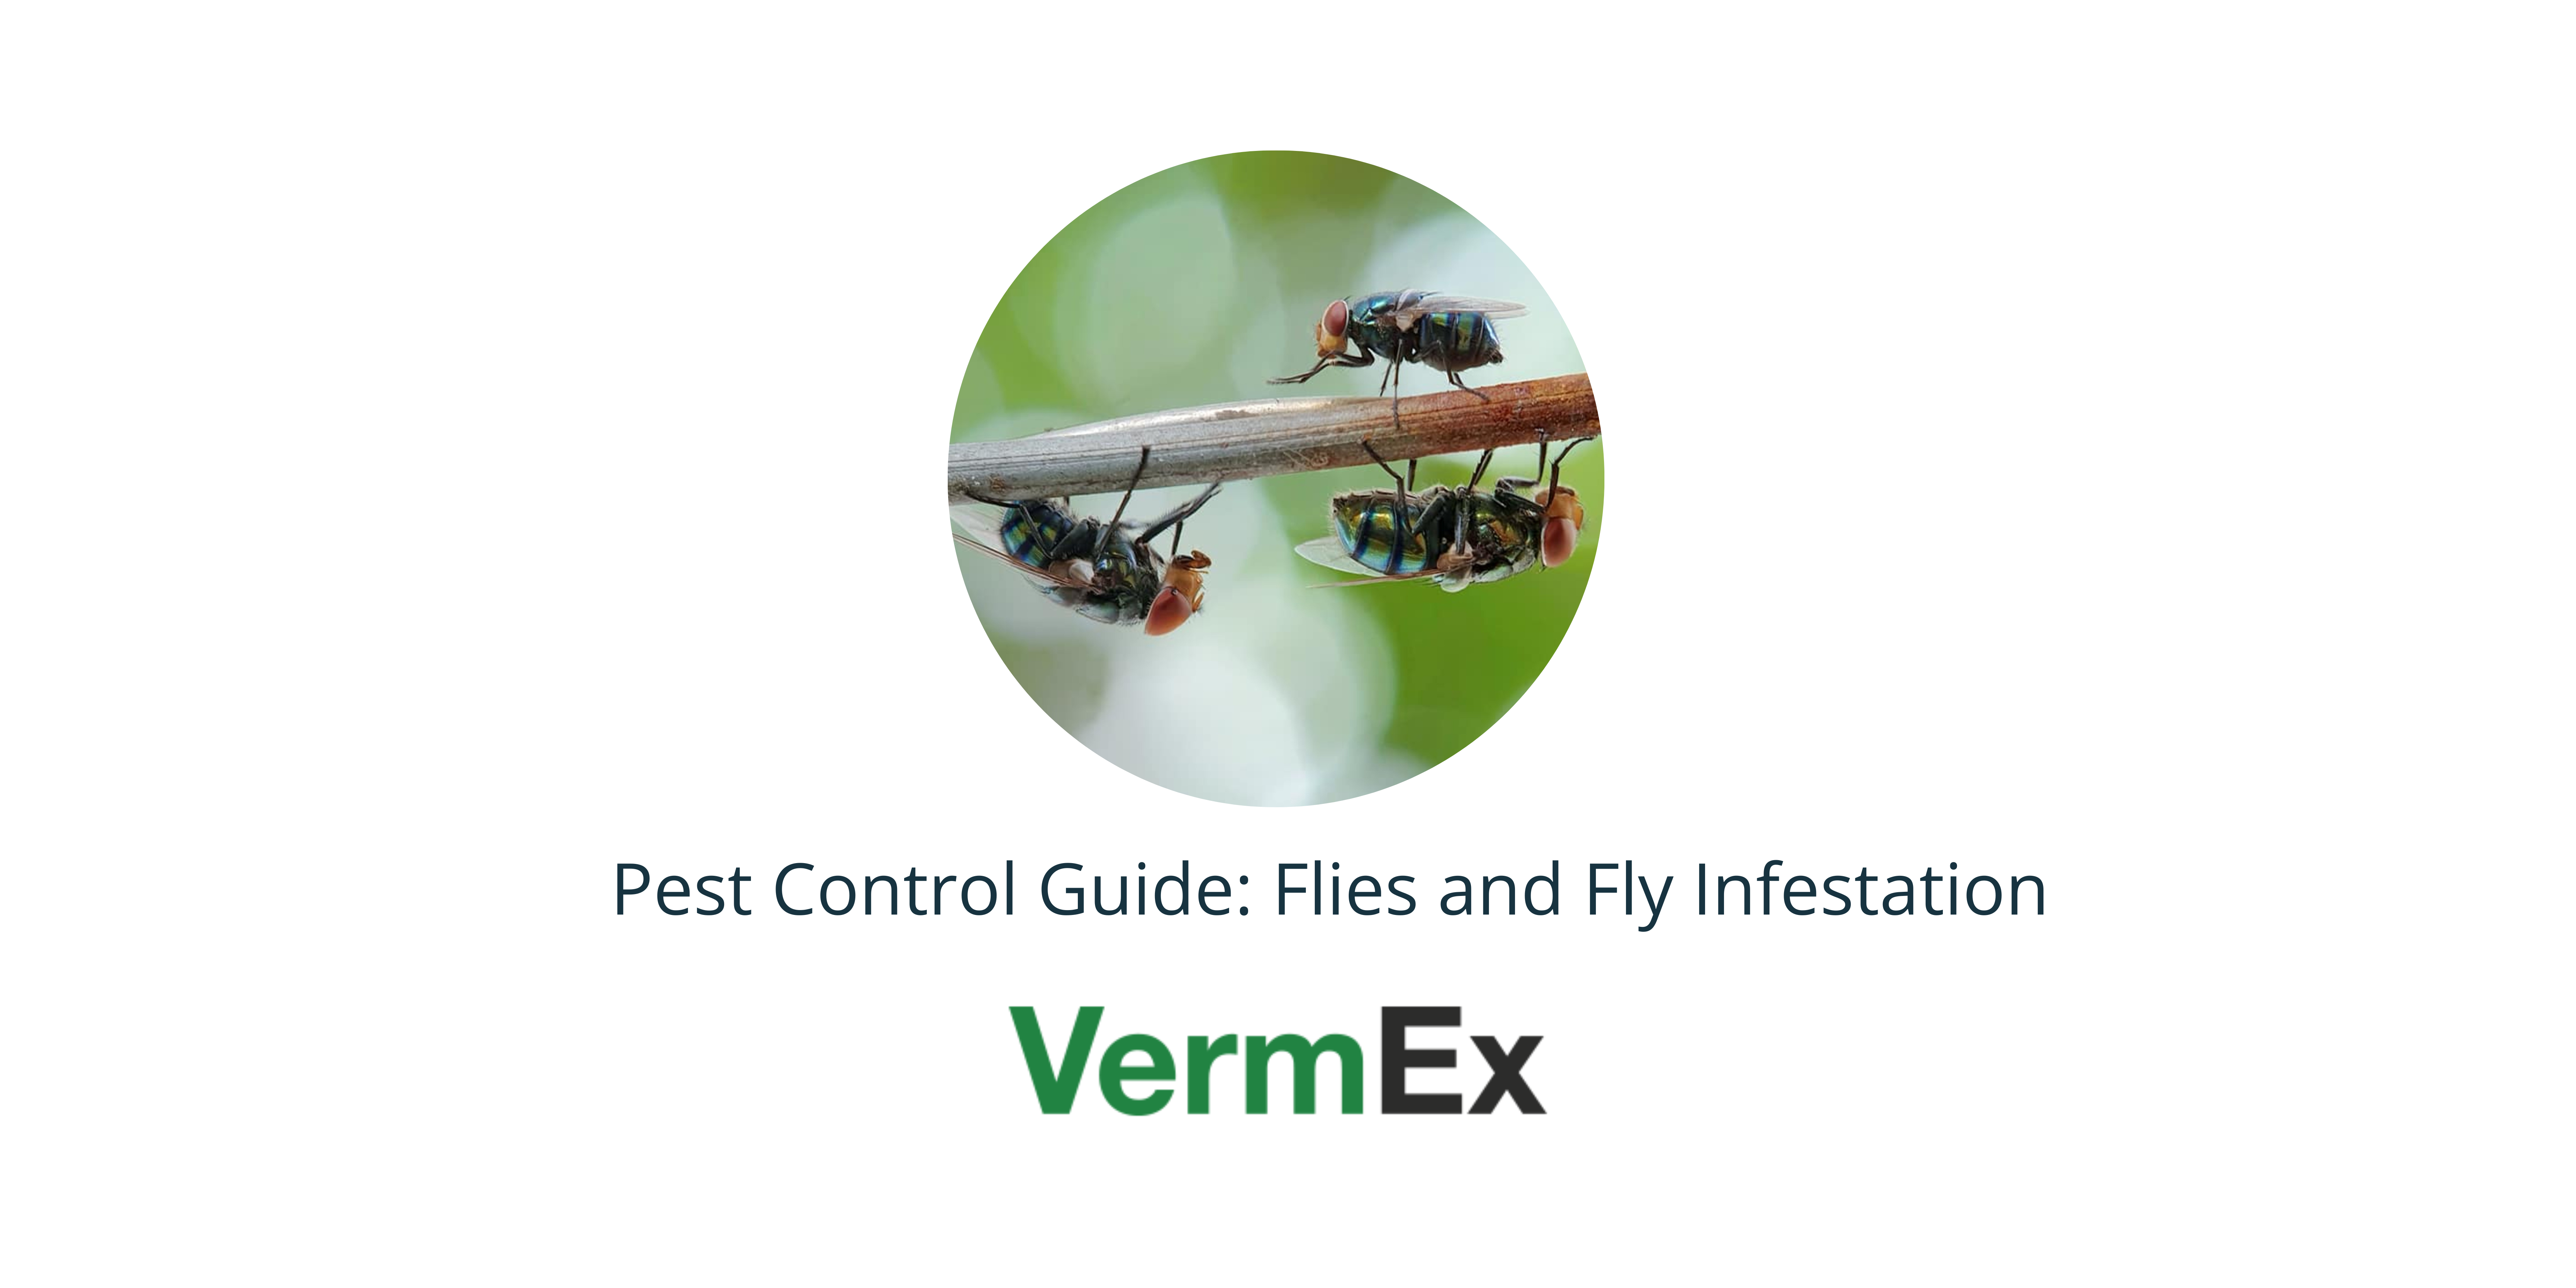 Pest control guide: flies and fly infestation blog banner